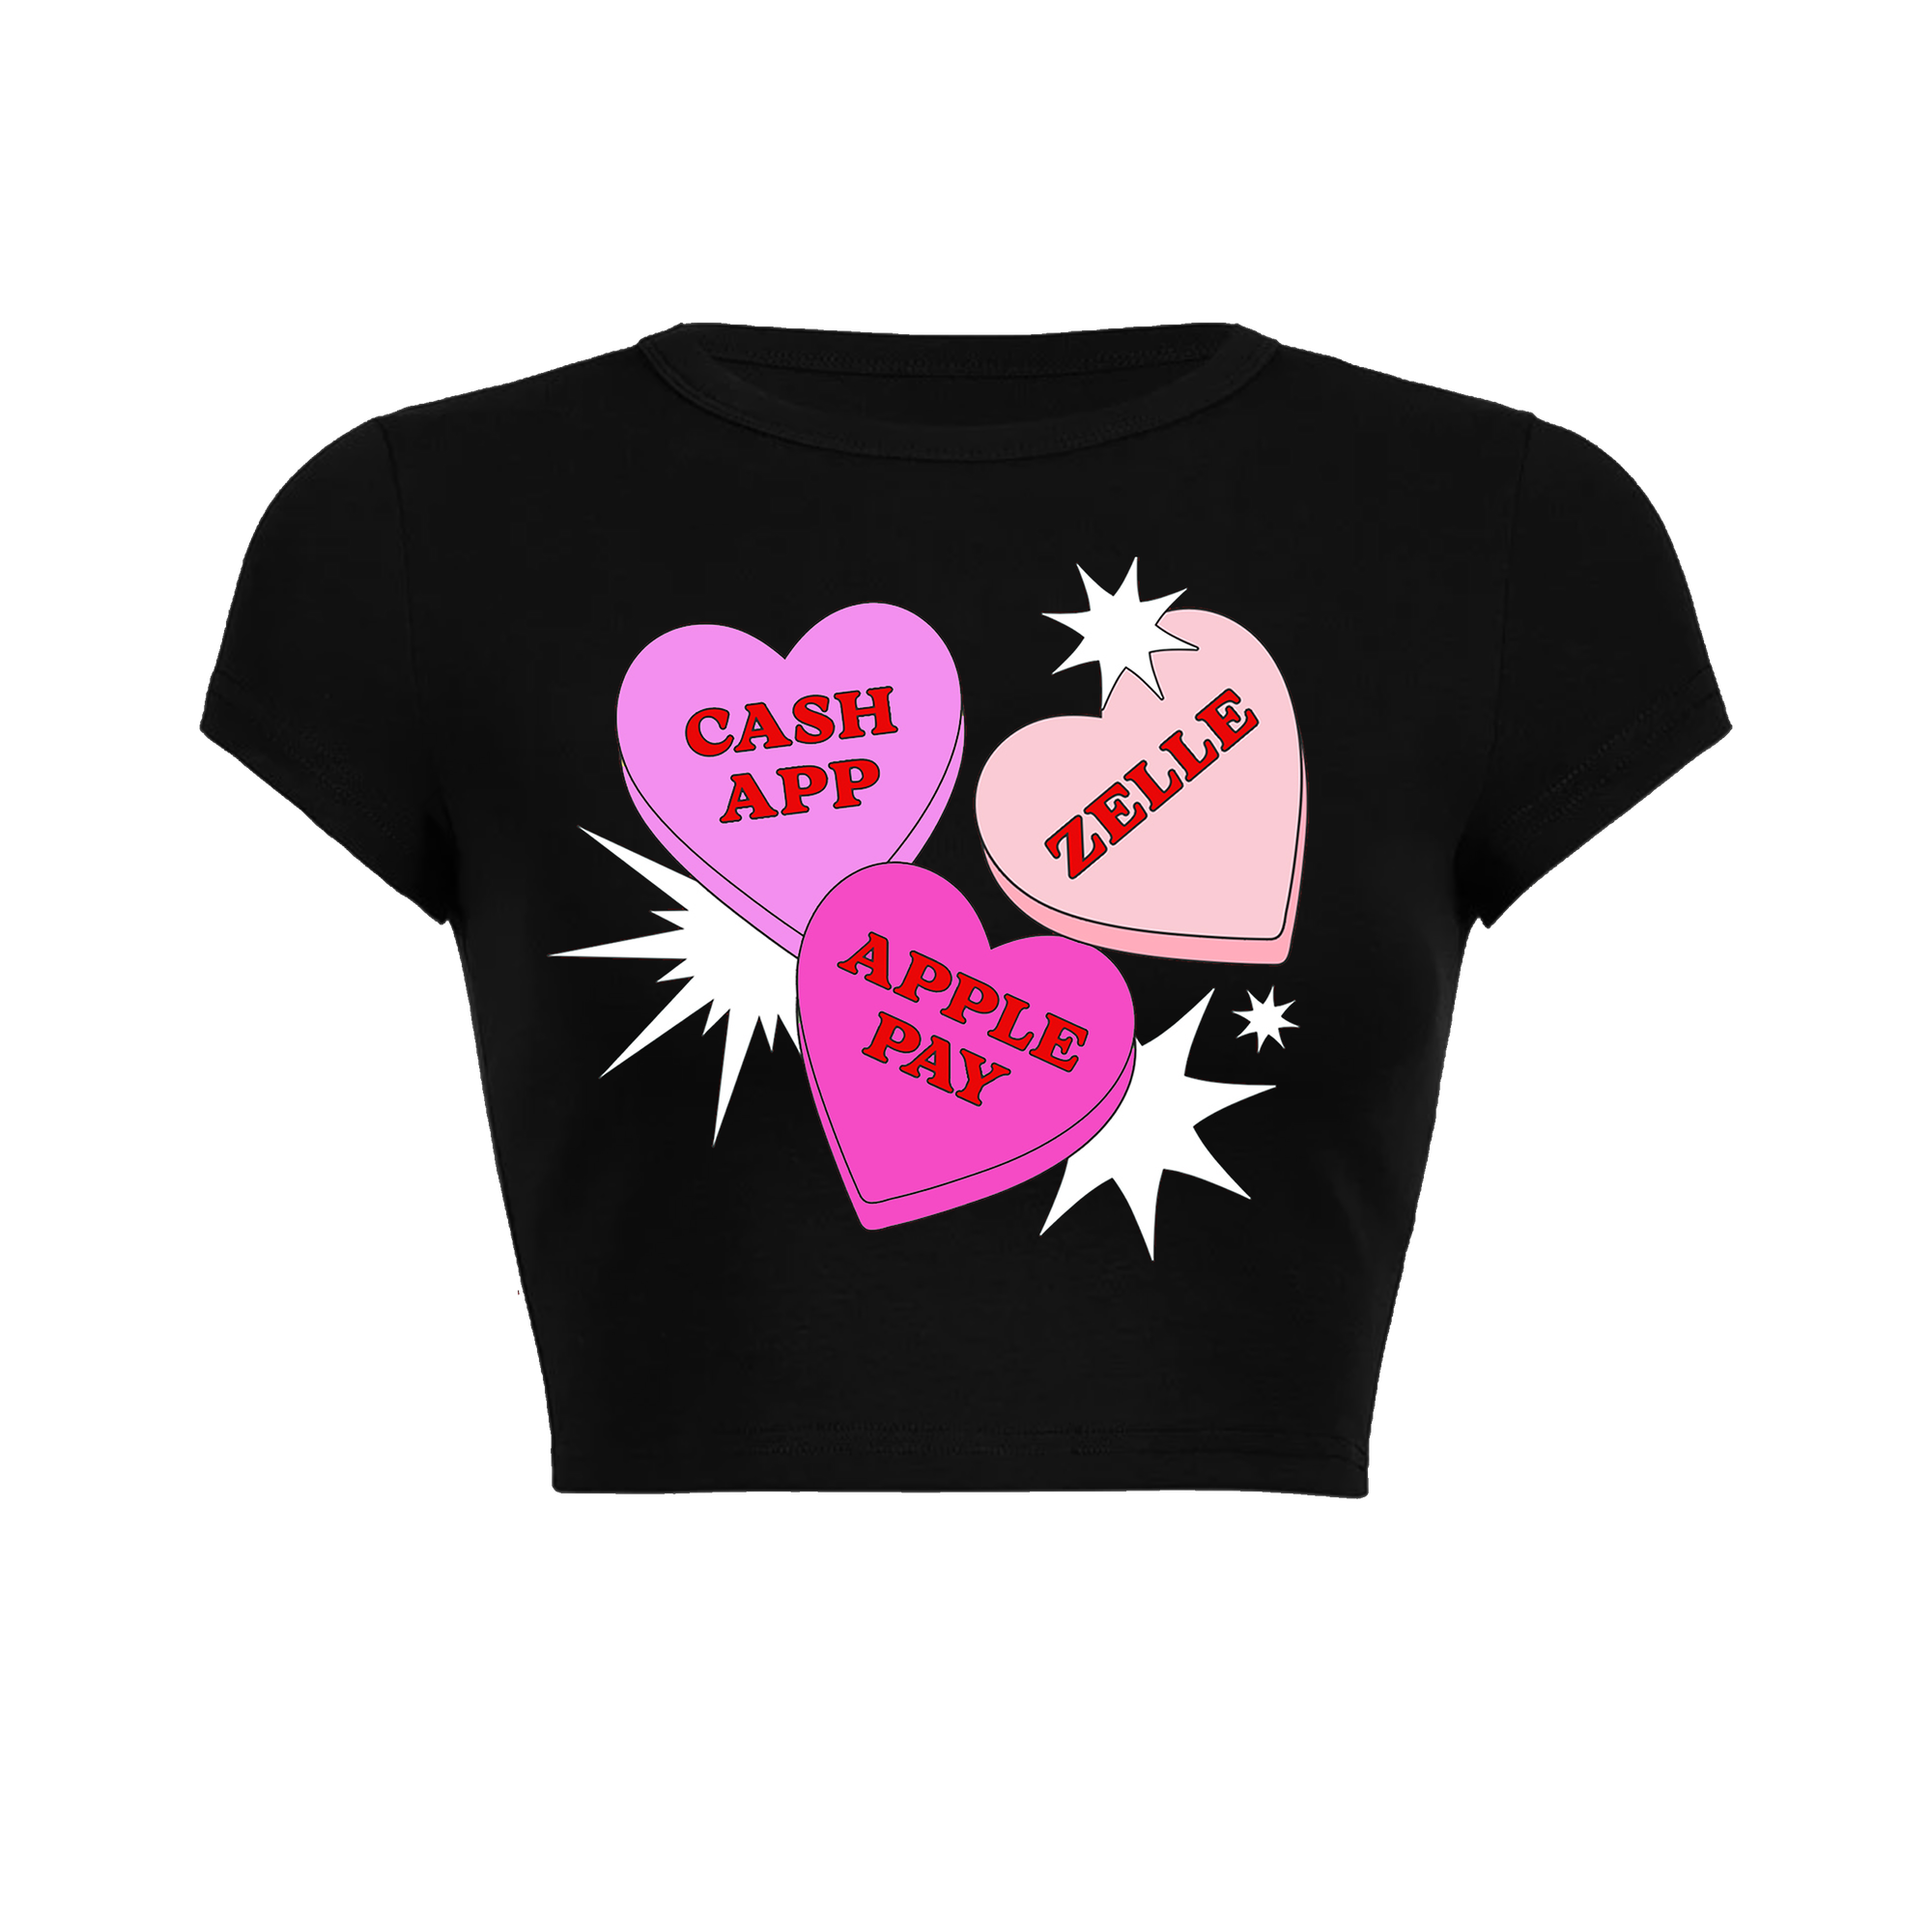 SAFE FUN SHOW SOME LOVE LIMITED BABY TEE (BLK)